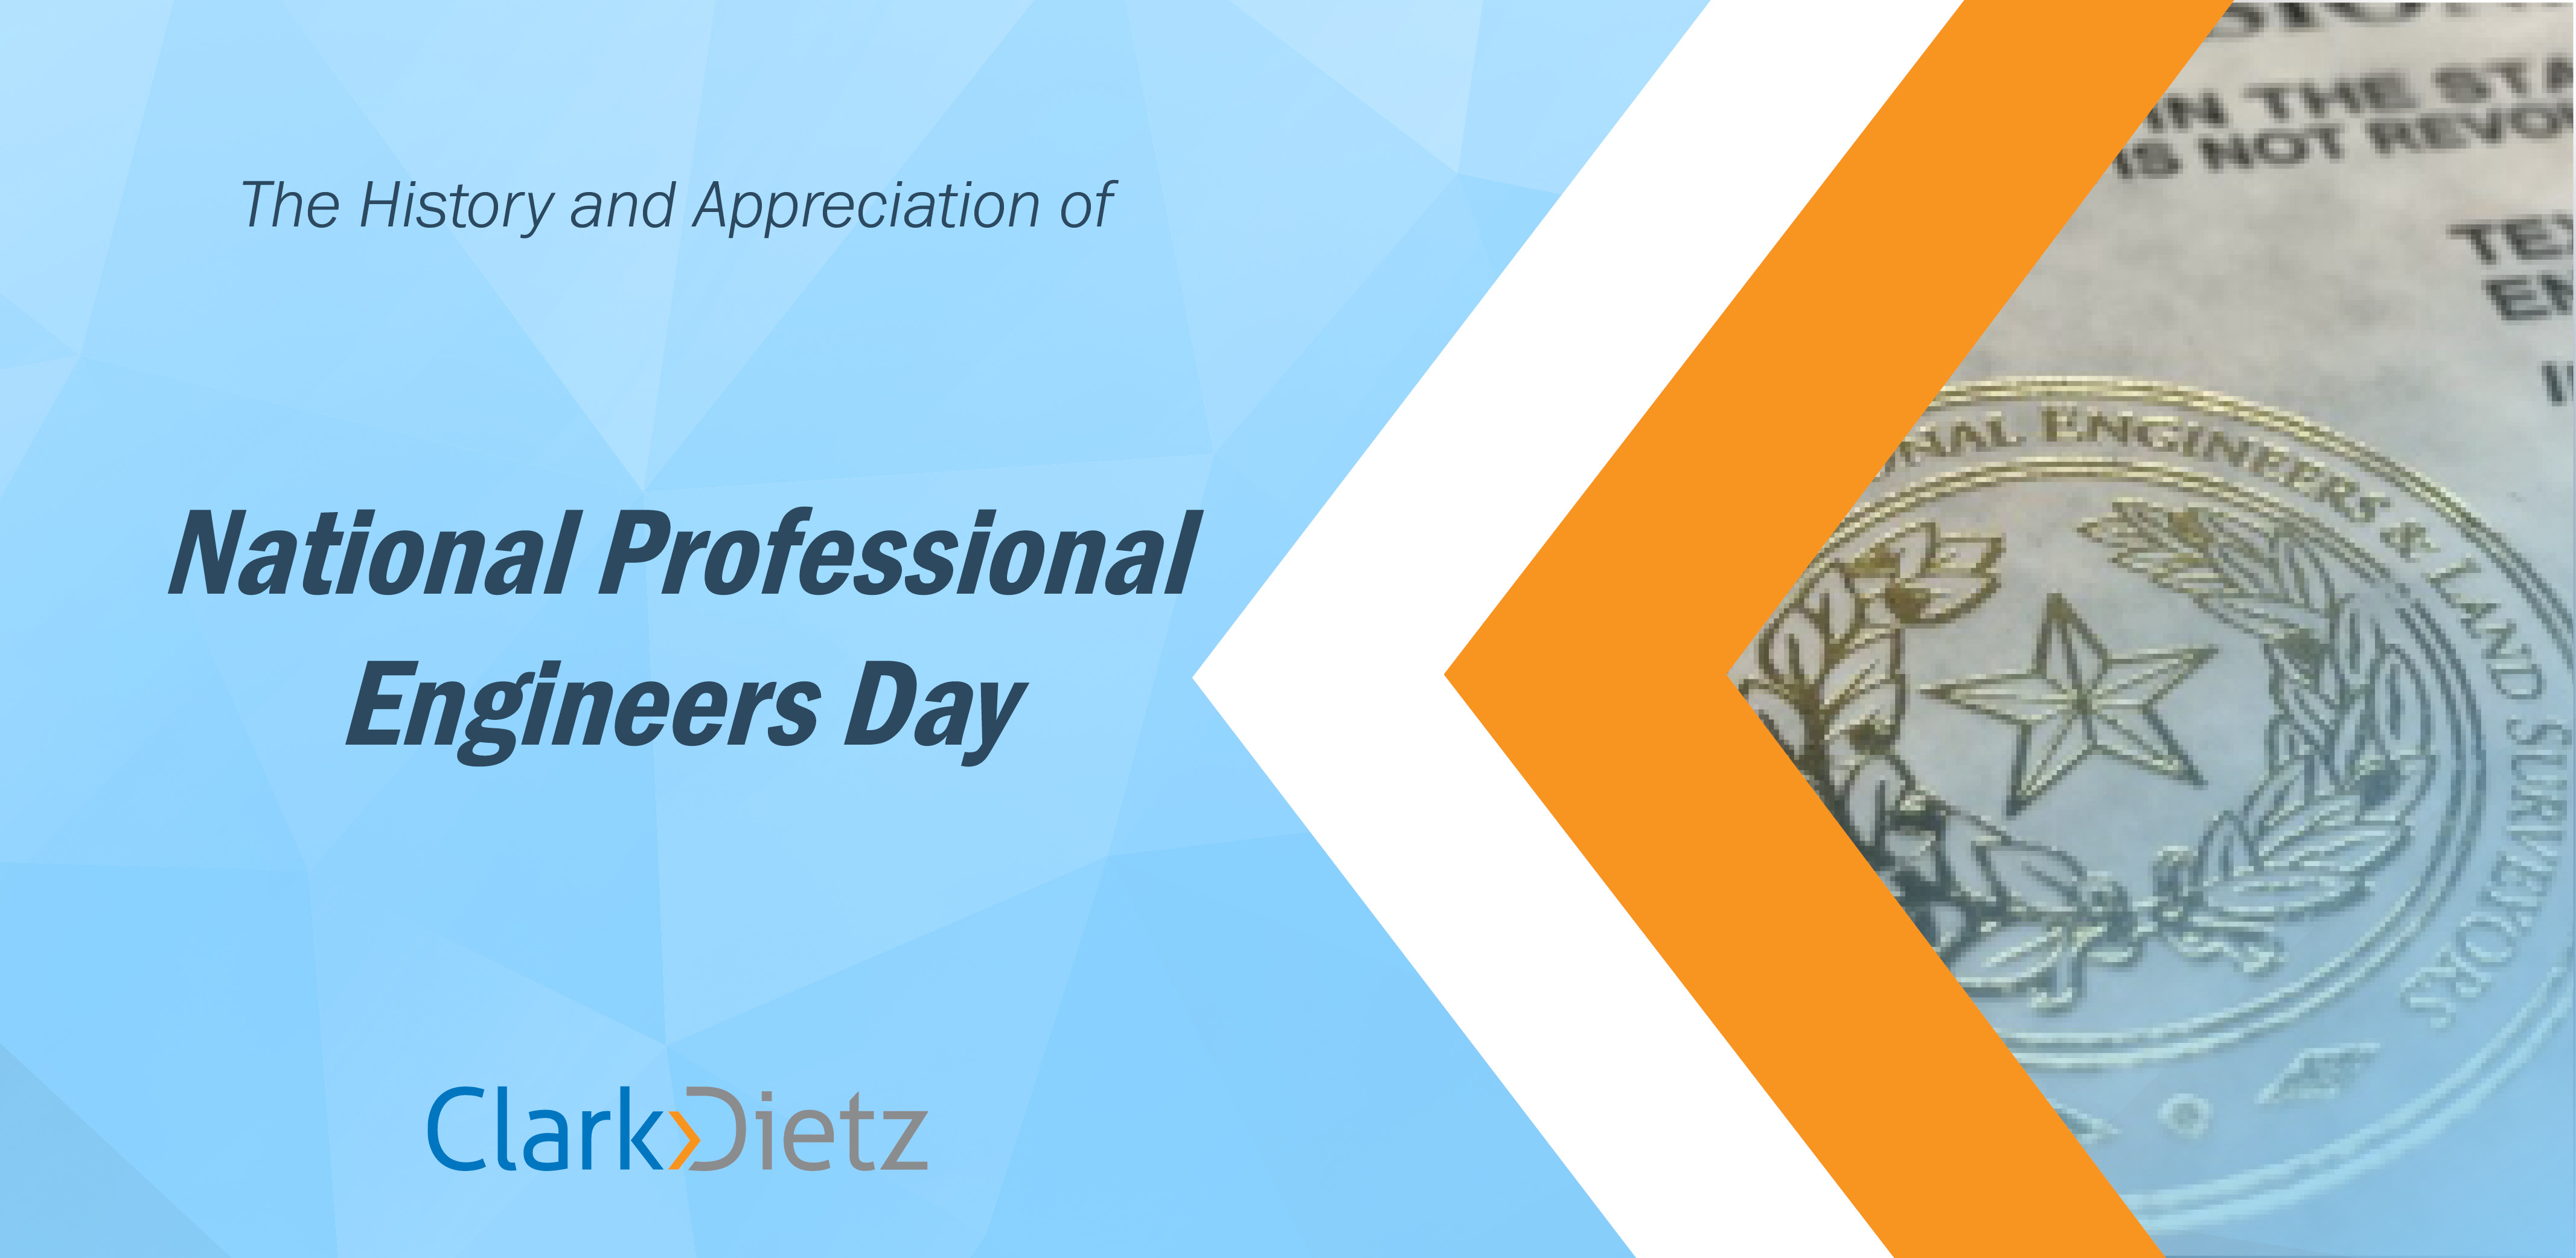 The History and Appreciation of National Professional Engineers Day